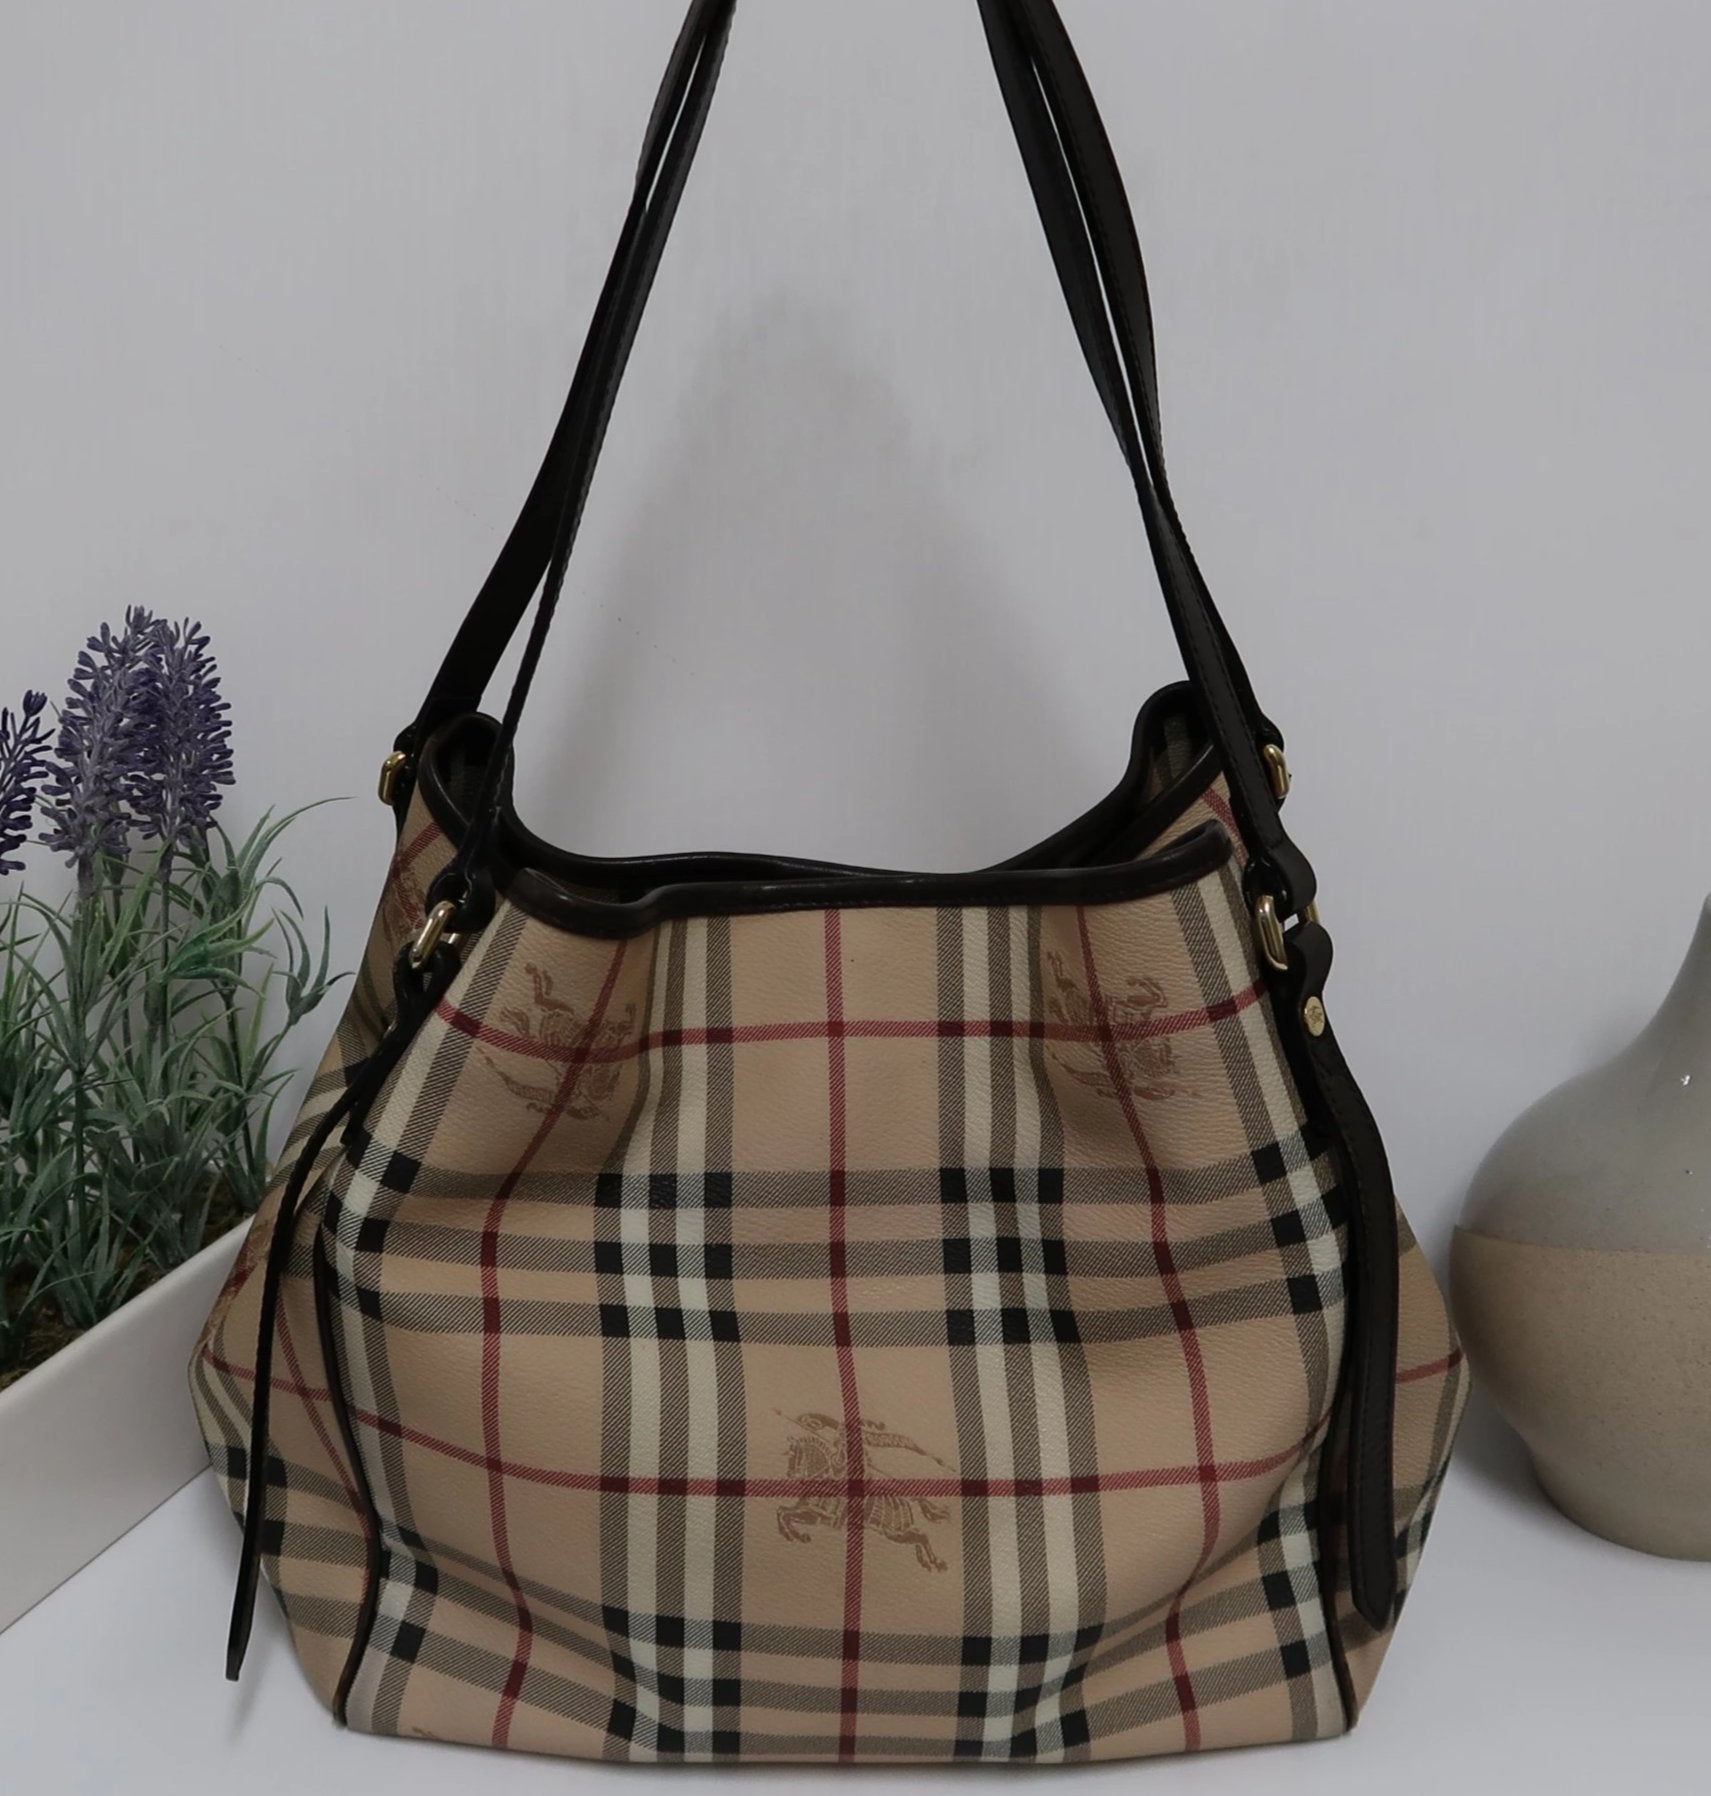 Authentic Burberry bag from the new collection